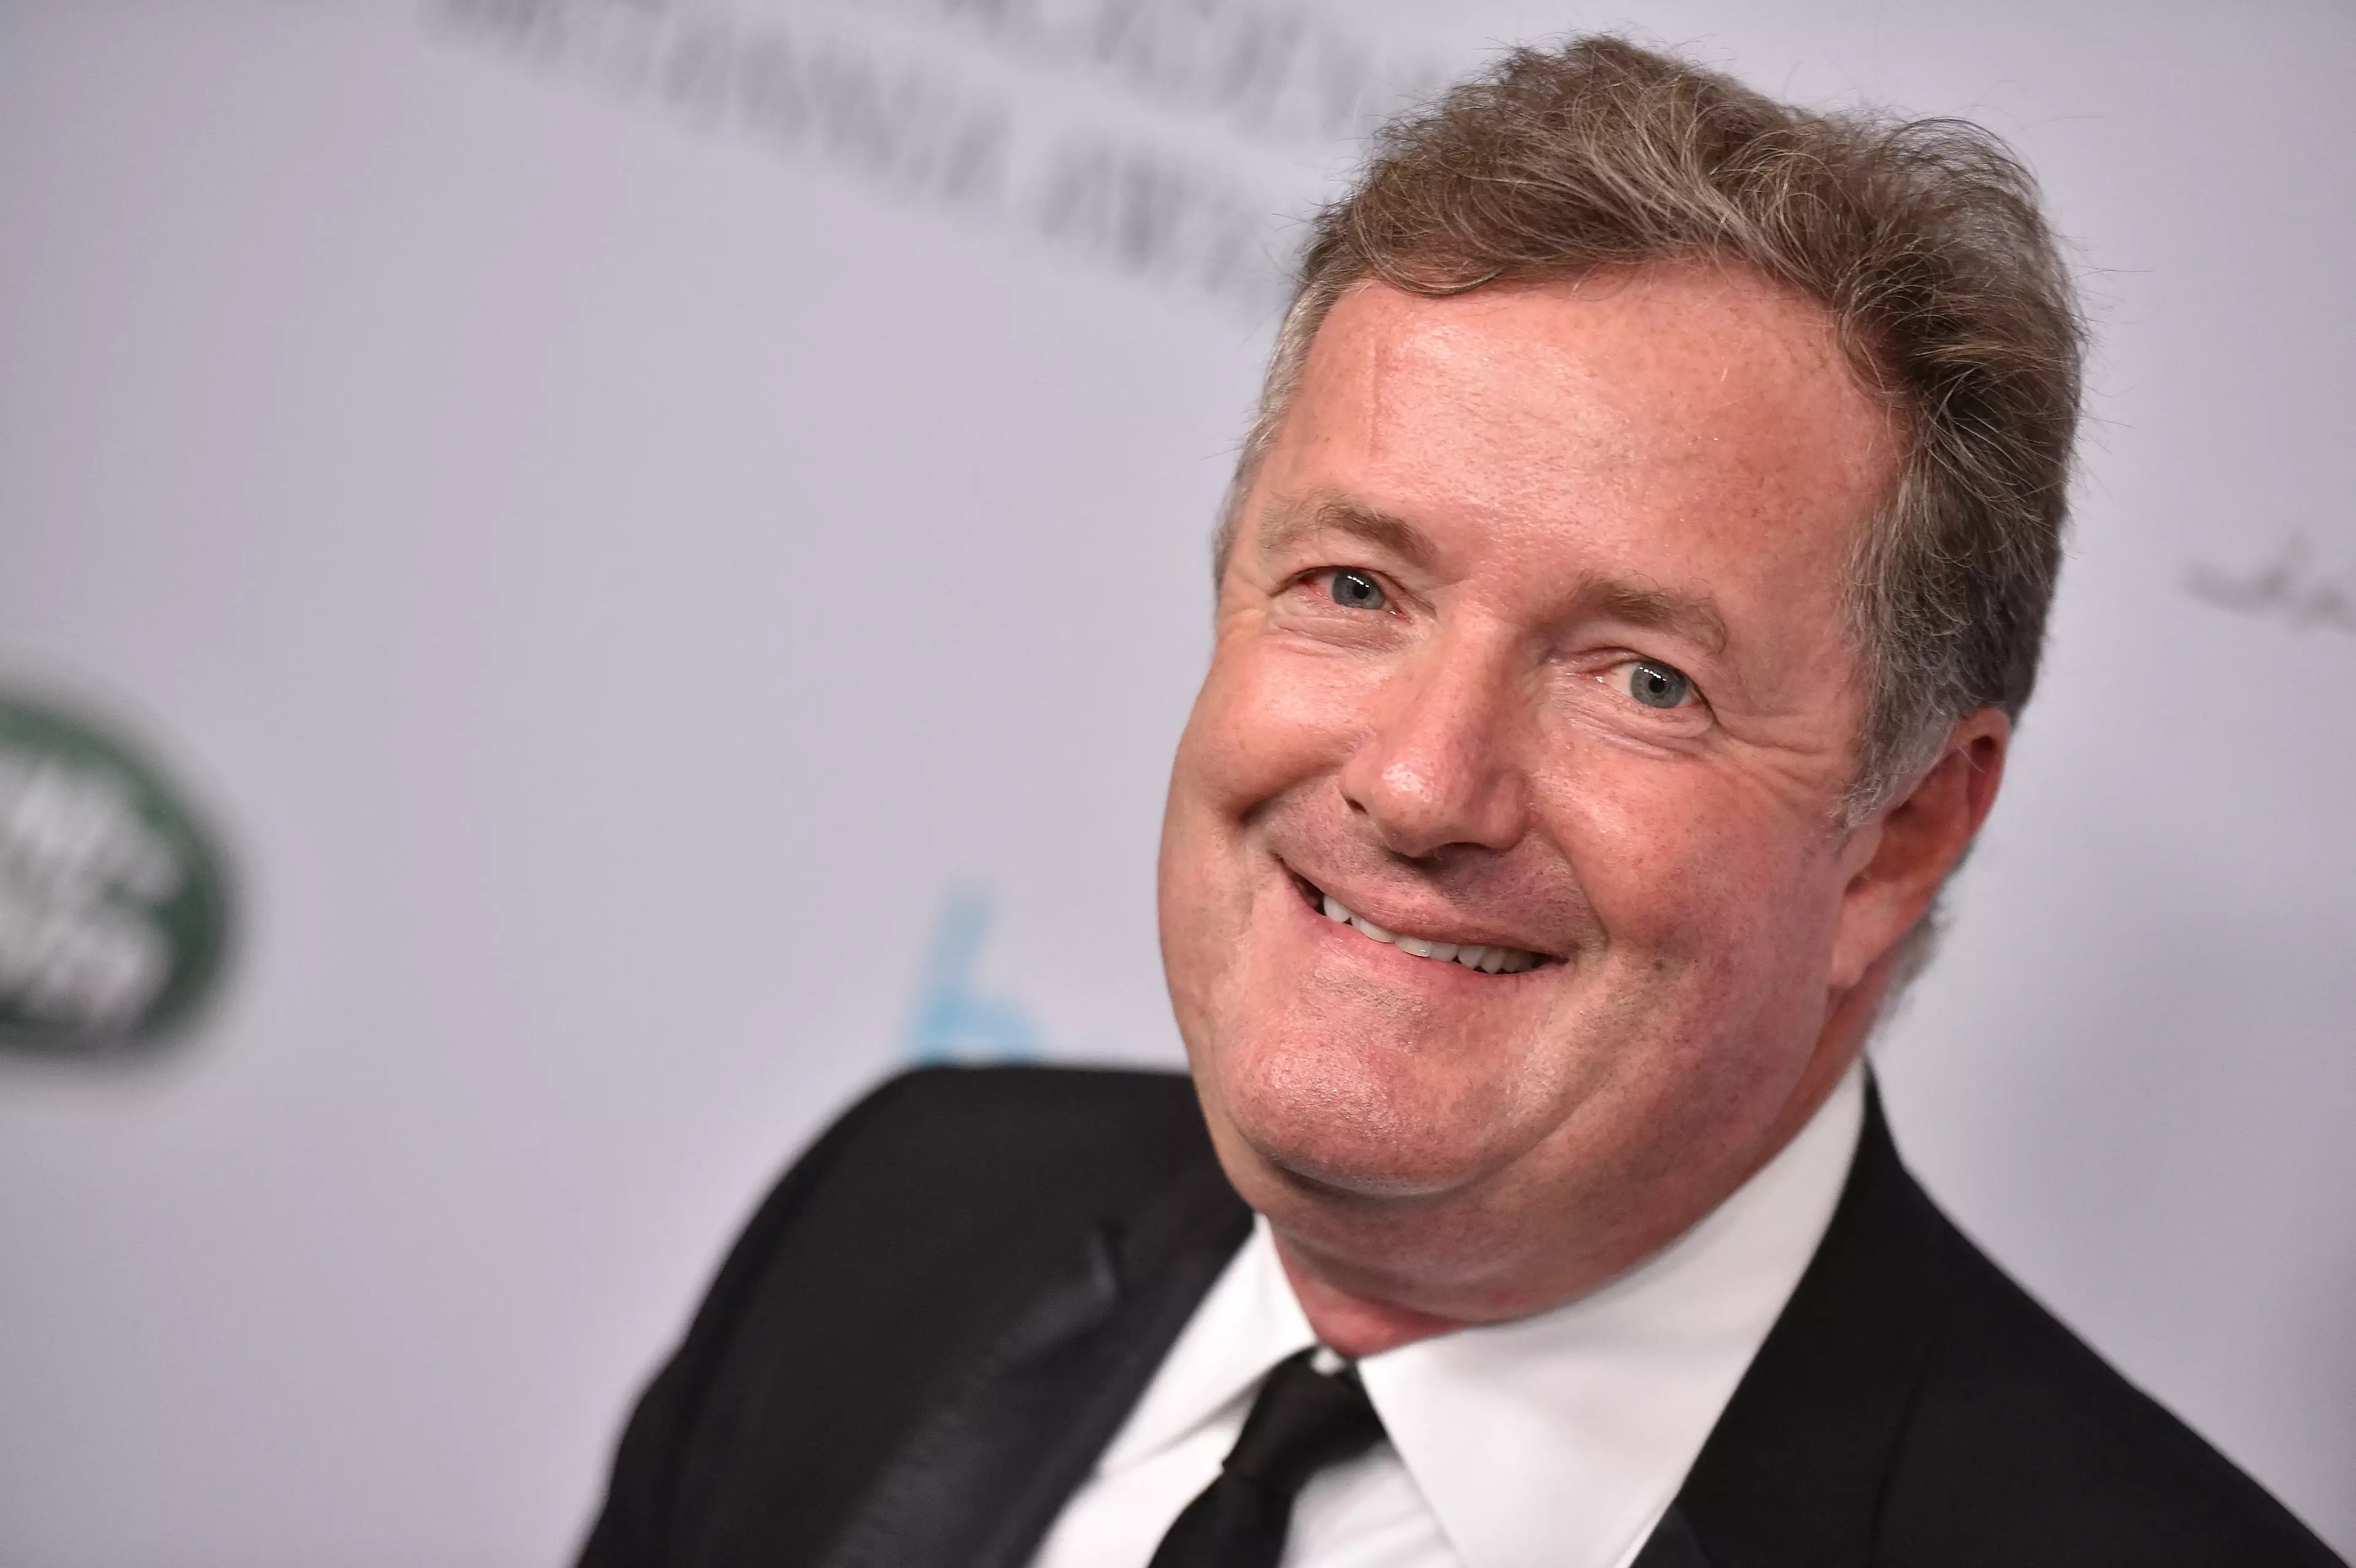 Piers Morgan hit out at the suspect.